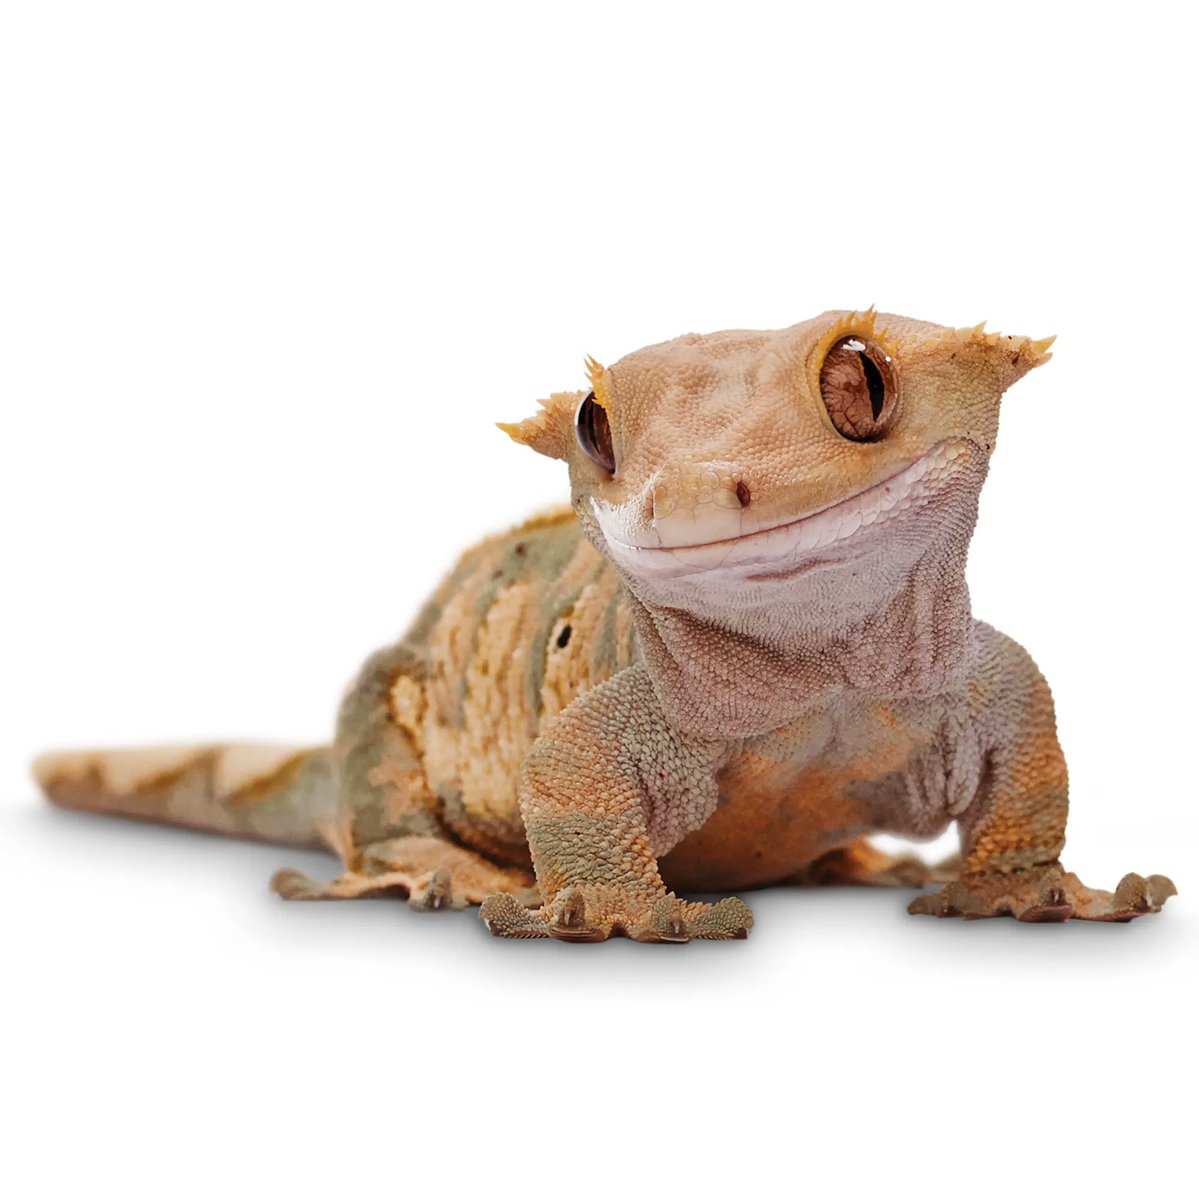 Tavros Nitram: Crested GeckoCresties are small, arboreal lizards that eat fruit and insects. Their only defense mechanism is to drop their tail, but unlike many other lizards, they cannot grow it back, leaving them with what many pet owners affectionately call frog butt.